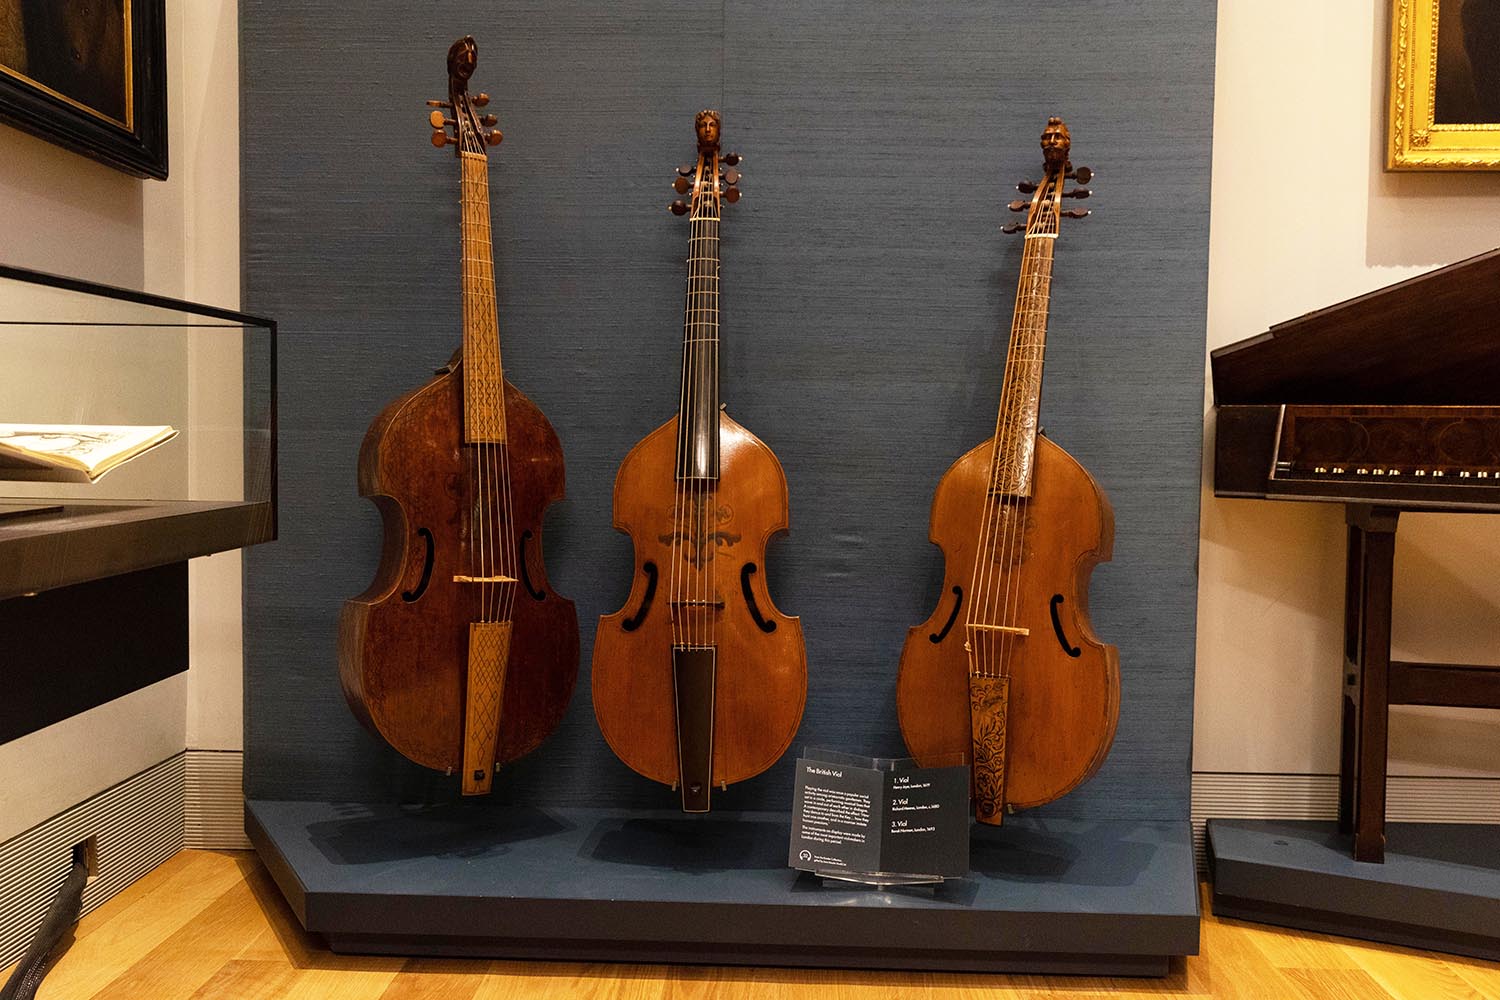 A collection of viols in the RCM Museum